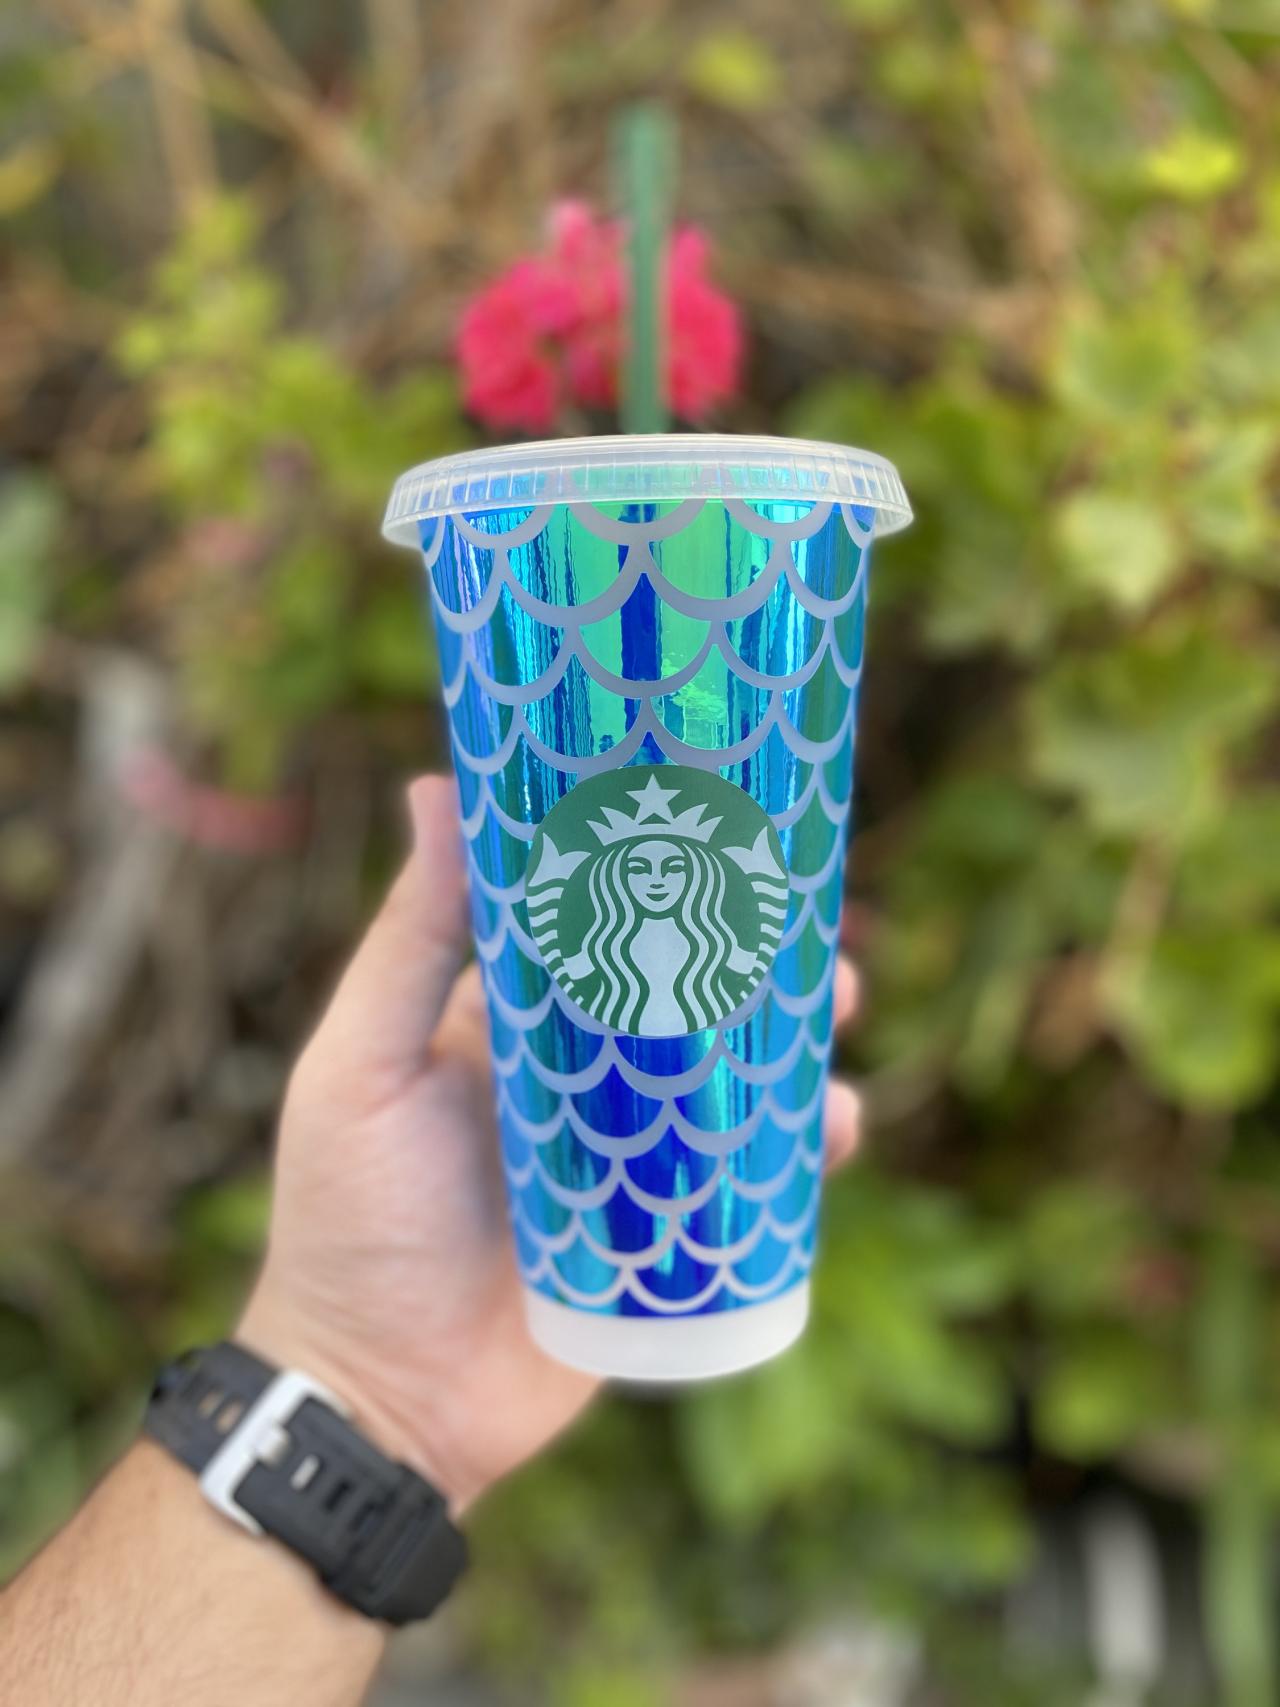 Full Mermaid Starbucks Cup, Mermaid Starbucks Tumbler, Reusable Cold Cup, Iced Coffee Tumbler, Personalized Cups